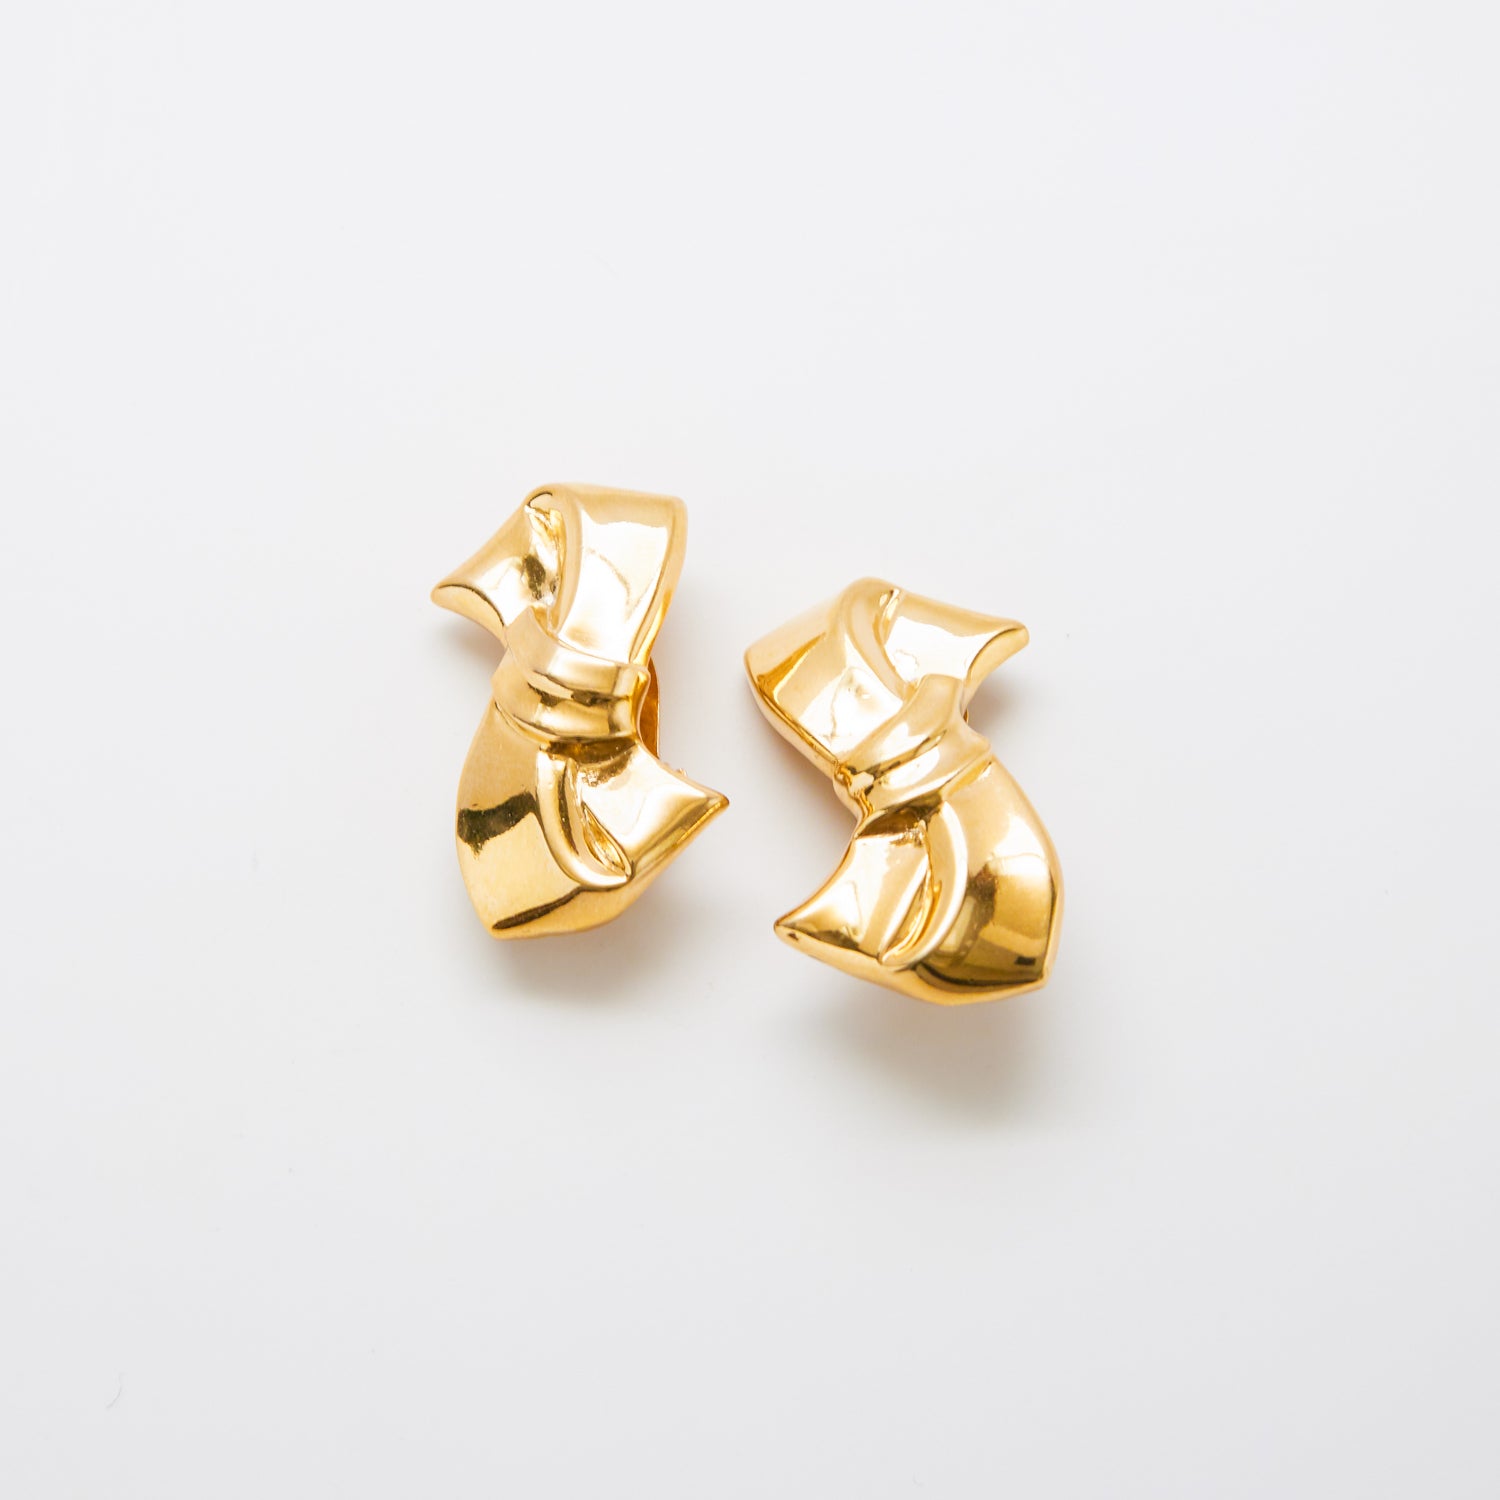 Vintage Gold Bow Earrings